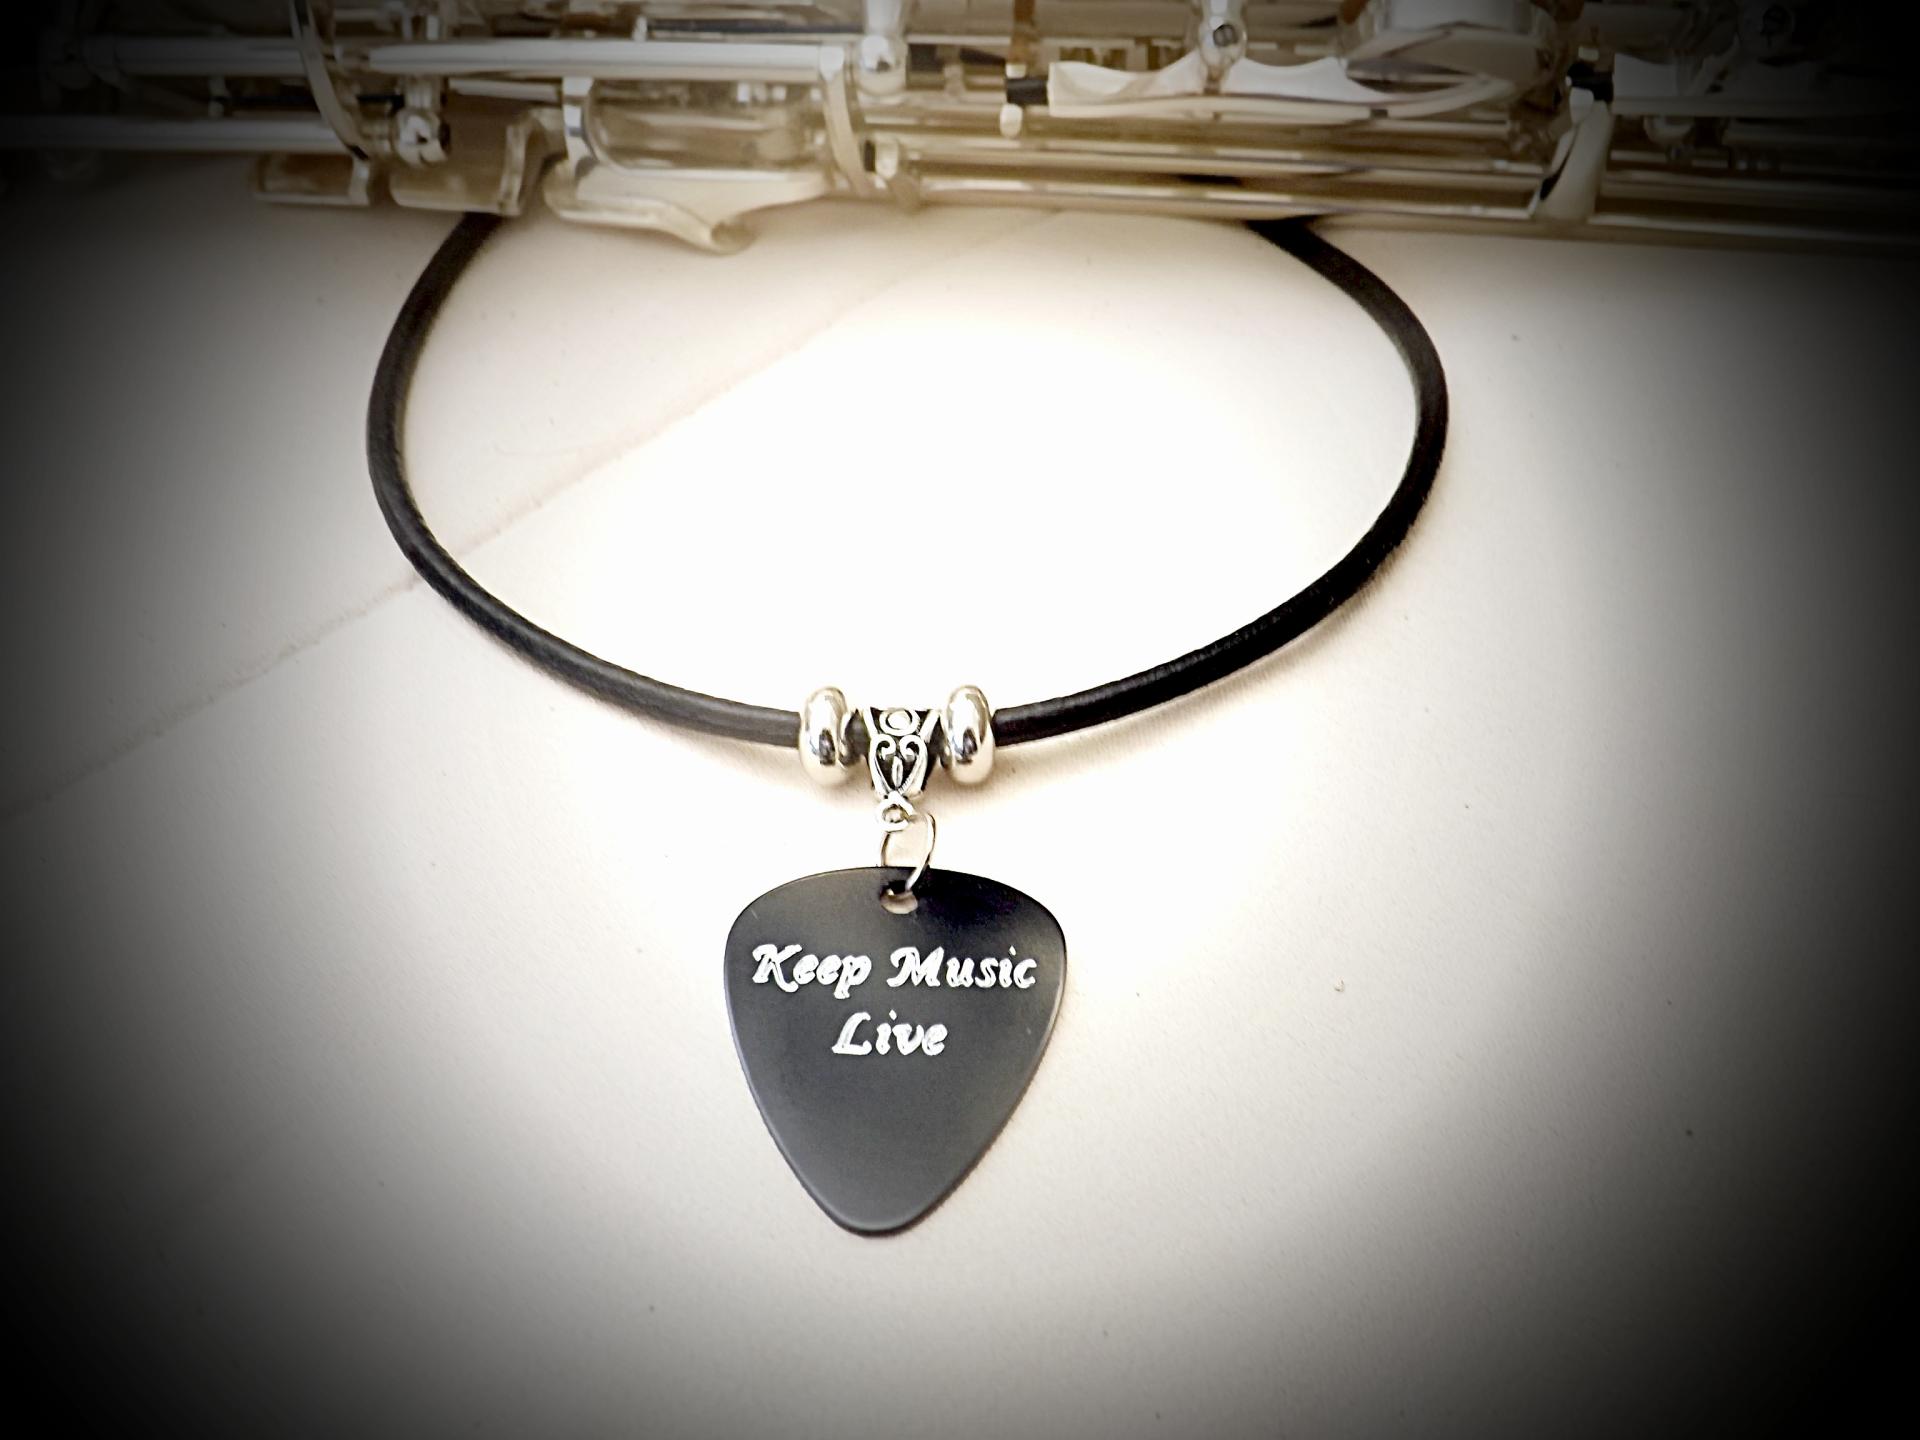 Leather Choker with Metal Guitar Pick - Choice of Slogan and Colour